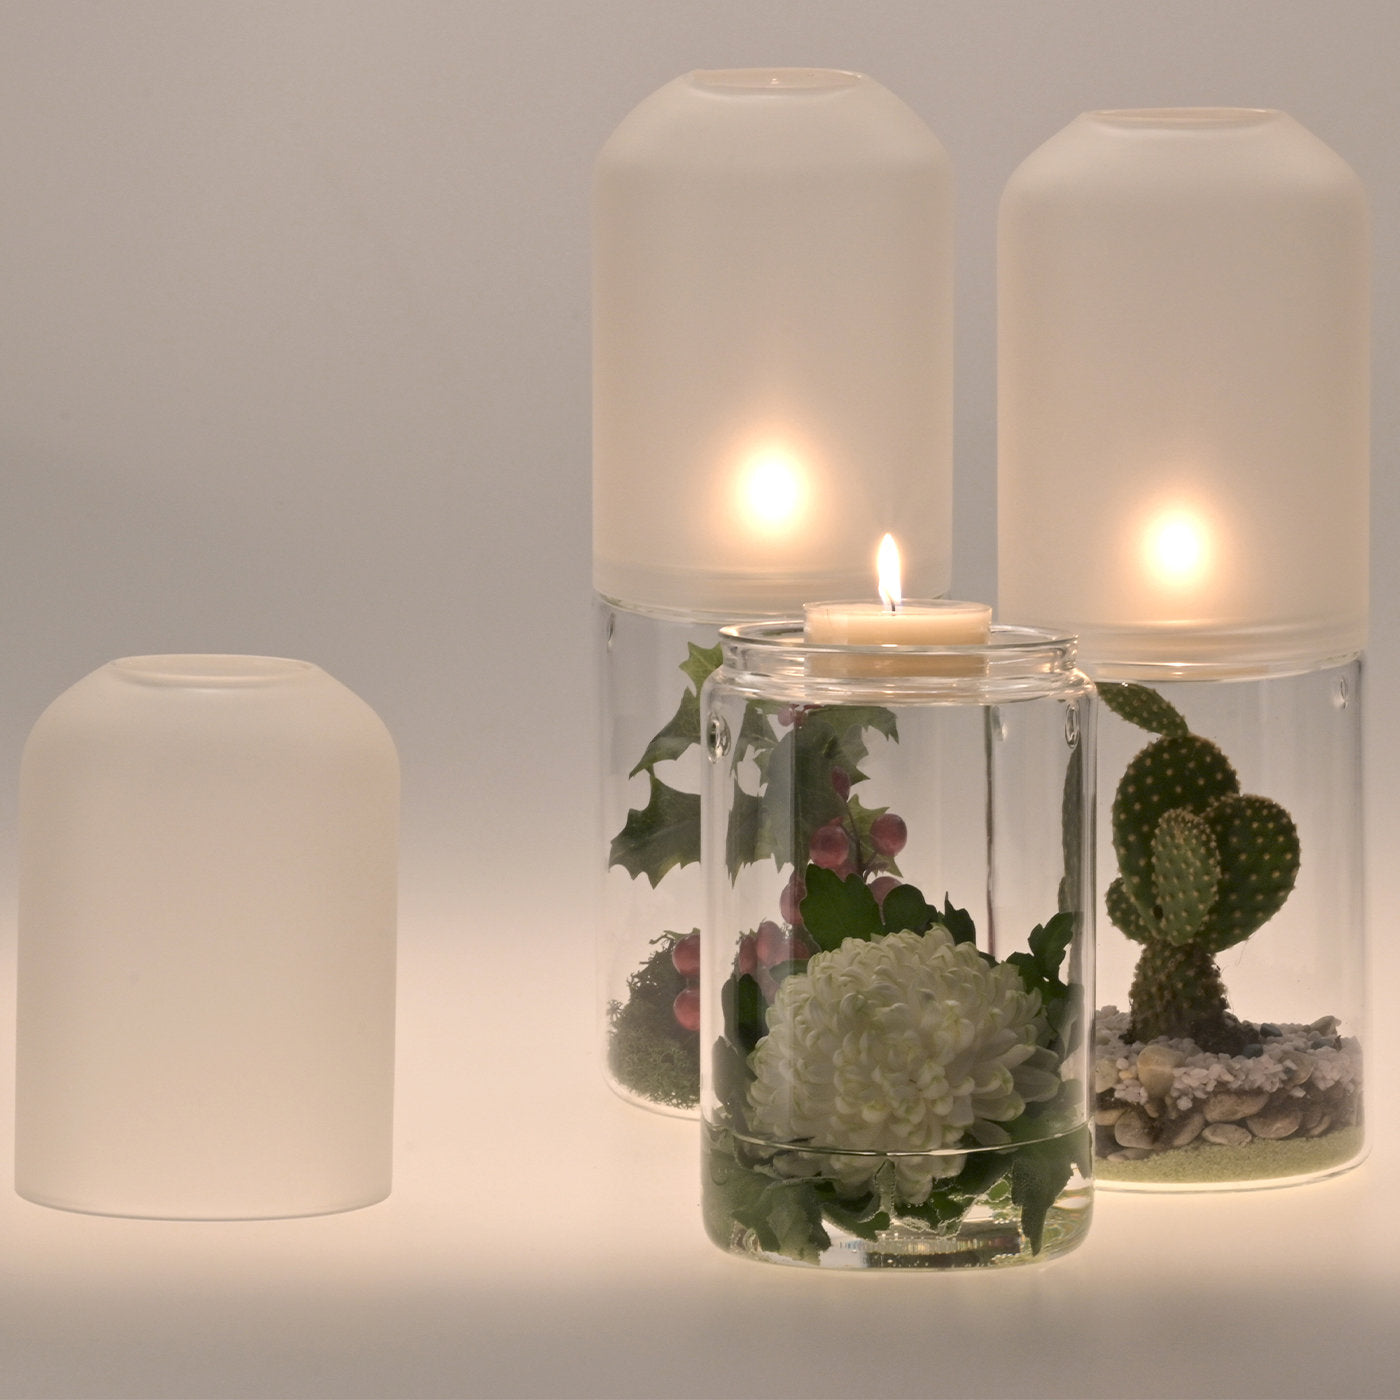 2-in-1 Candleholder - Alternative view 3